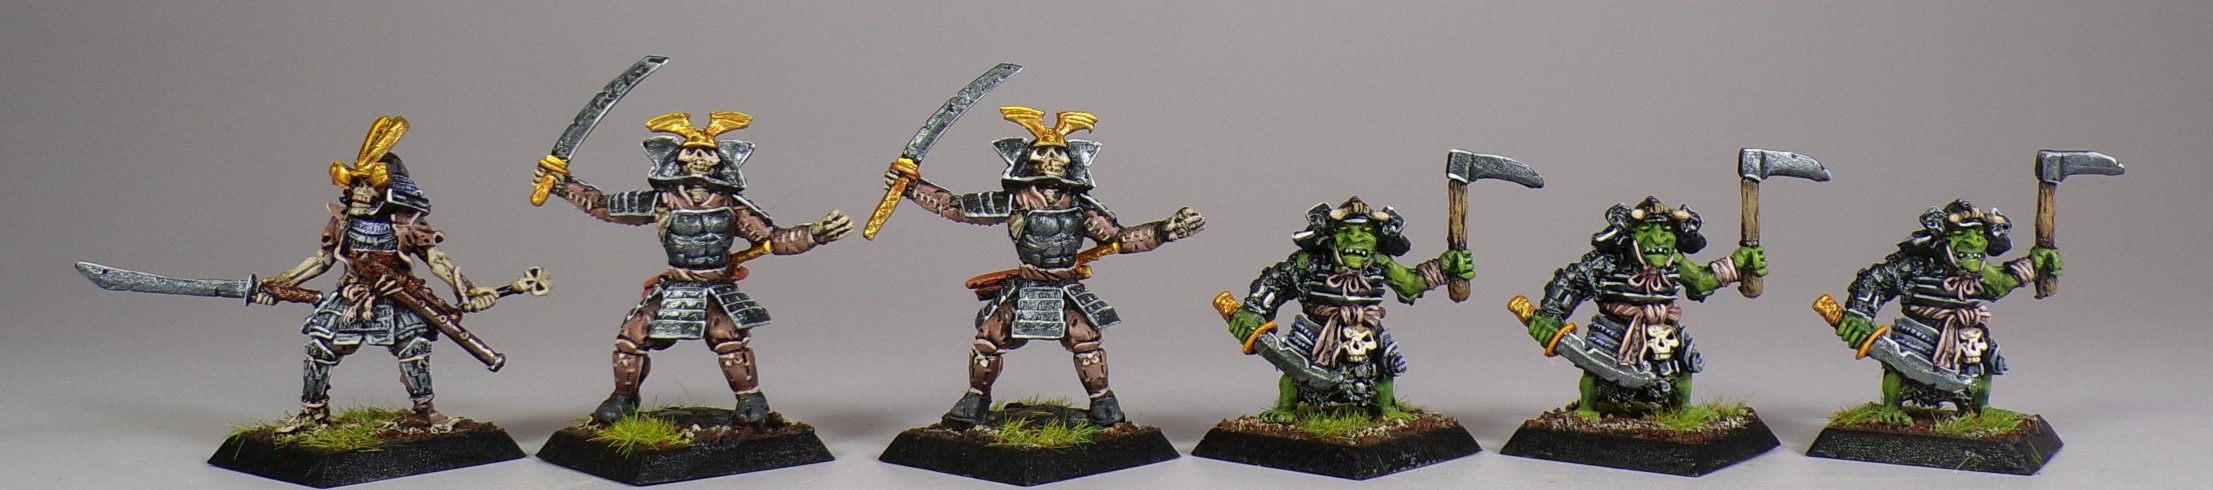 L5R Legend of the Five Rings Miniature Painting Service Paintedfigs (22).jpg